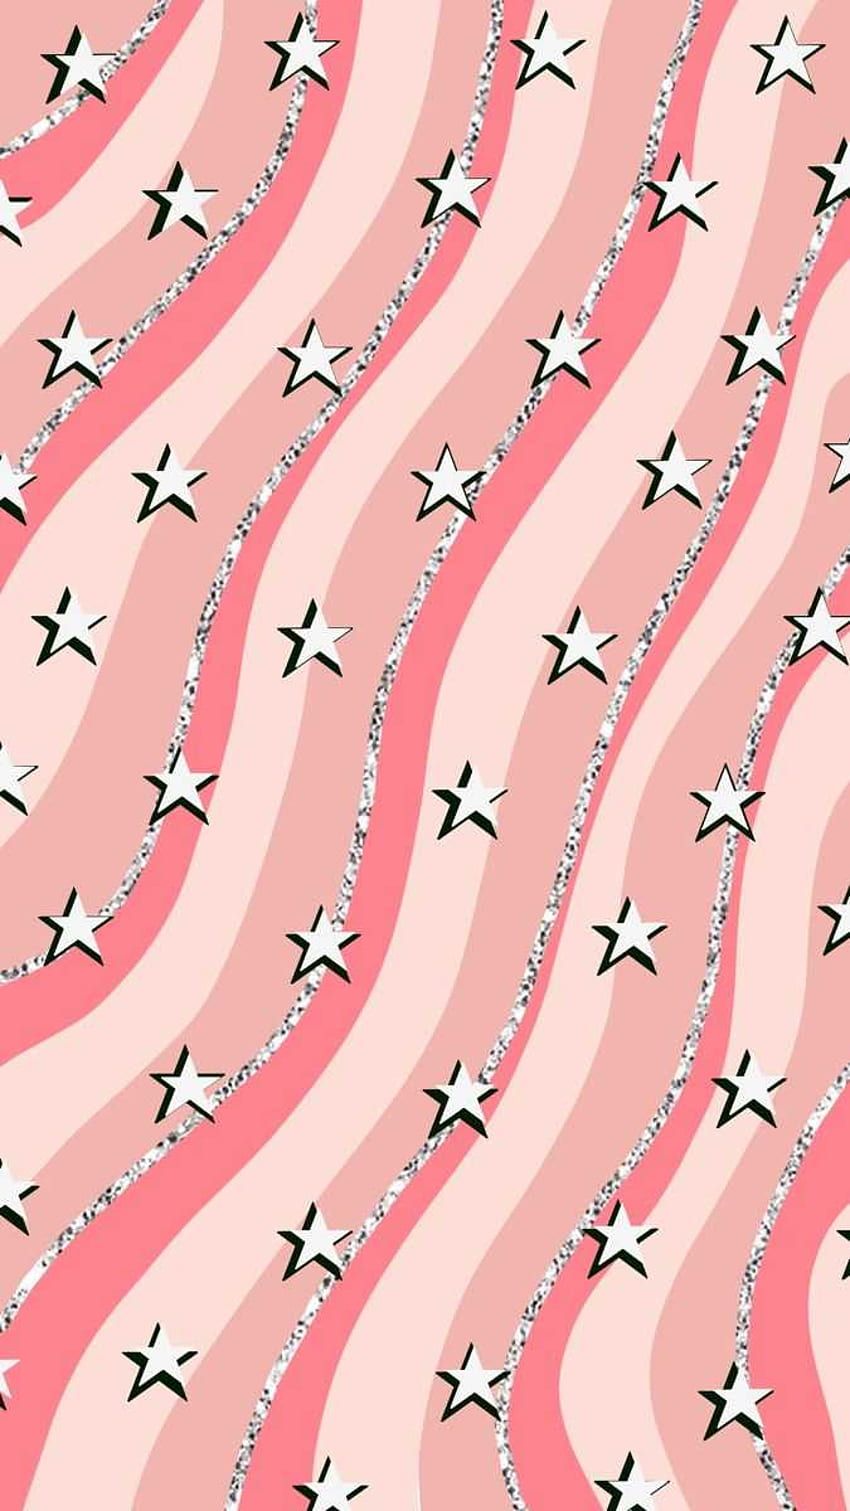 A pink and white wallpaper with shooting stars - Preppy